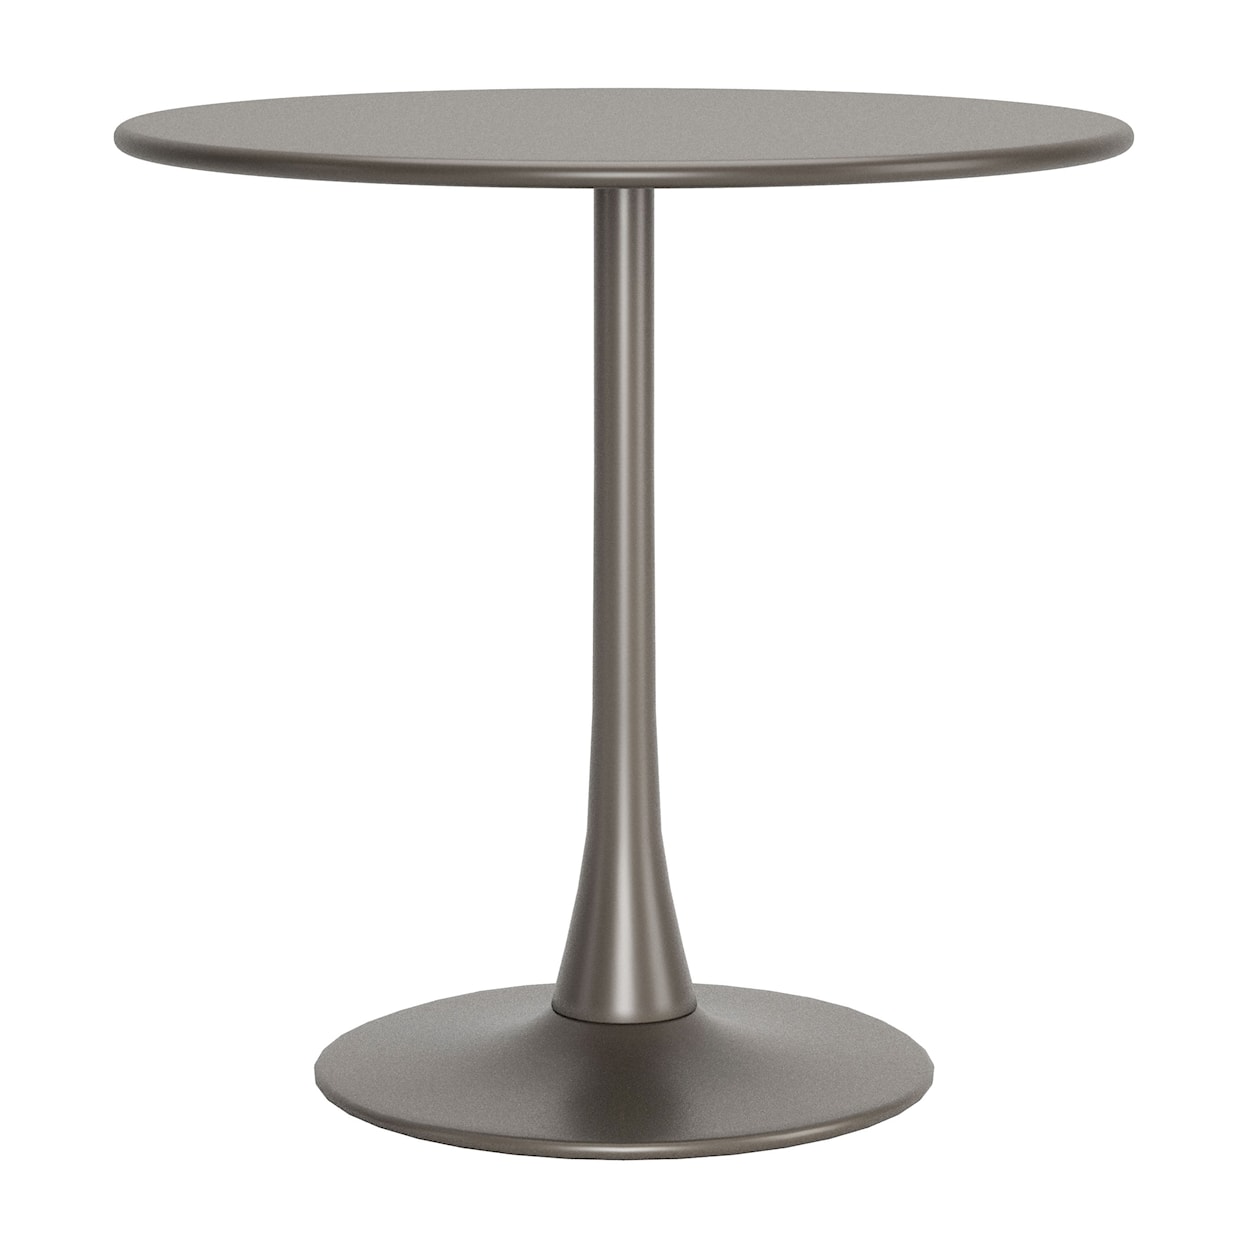 Zuo Soleil Outdoor Collection Dining Table